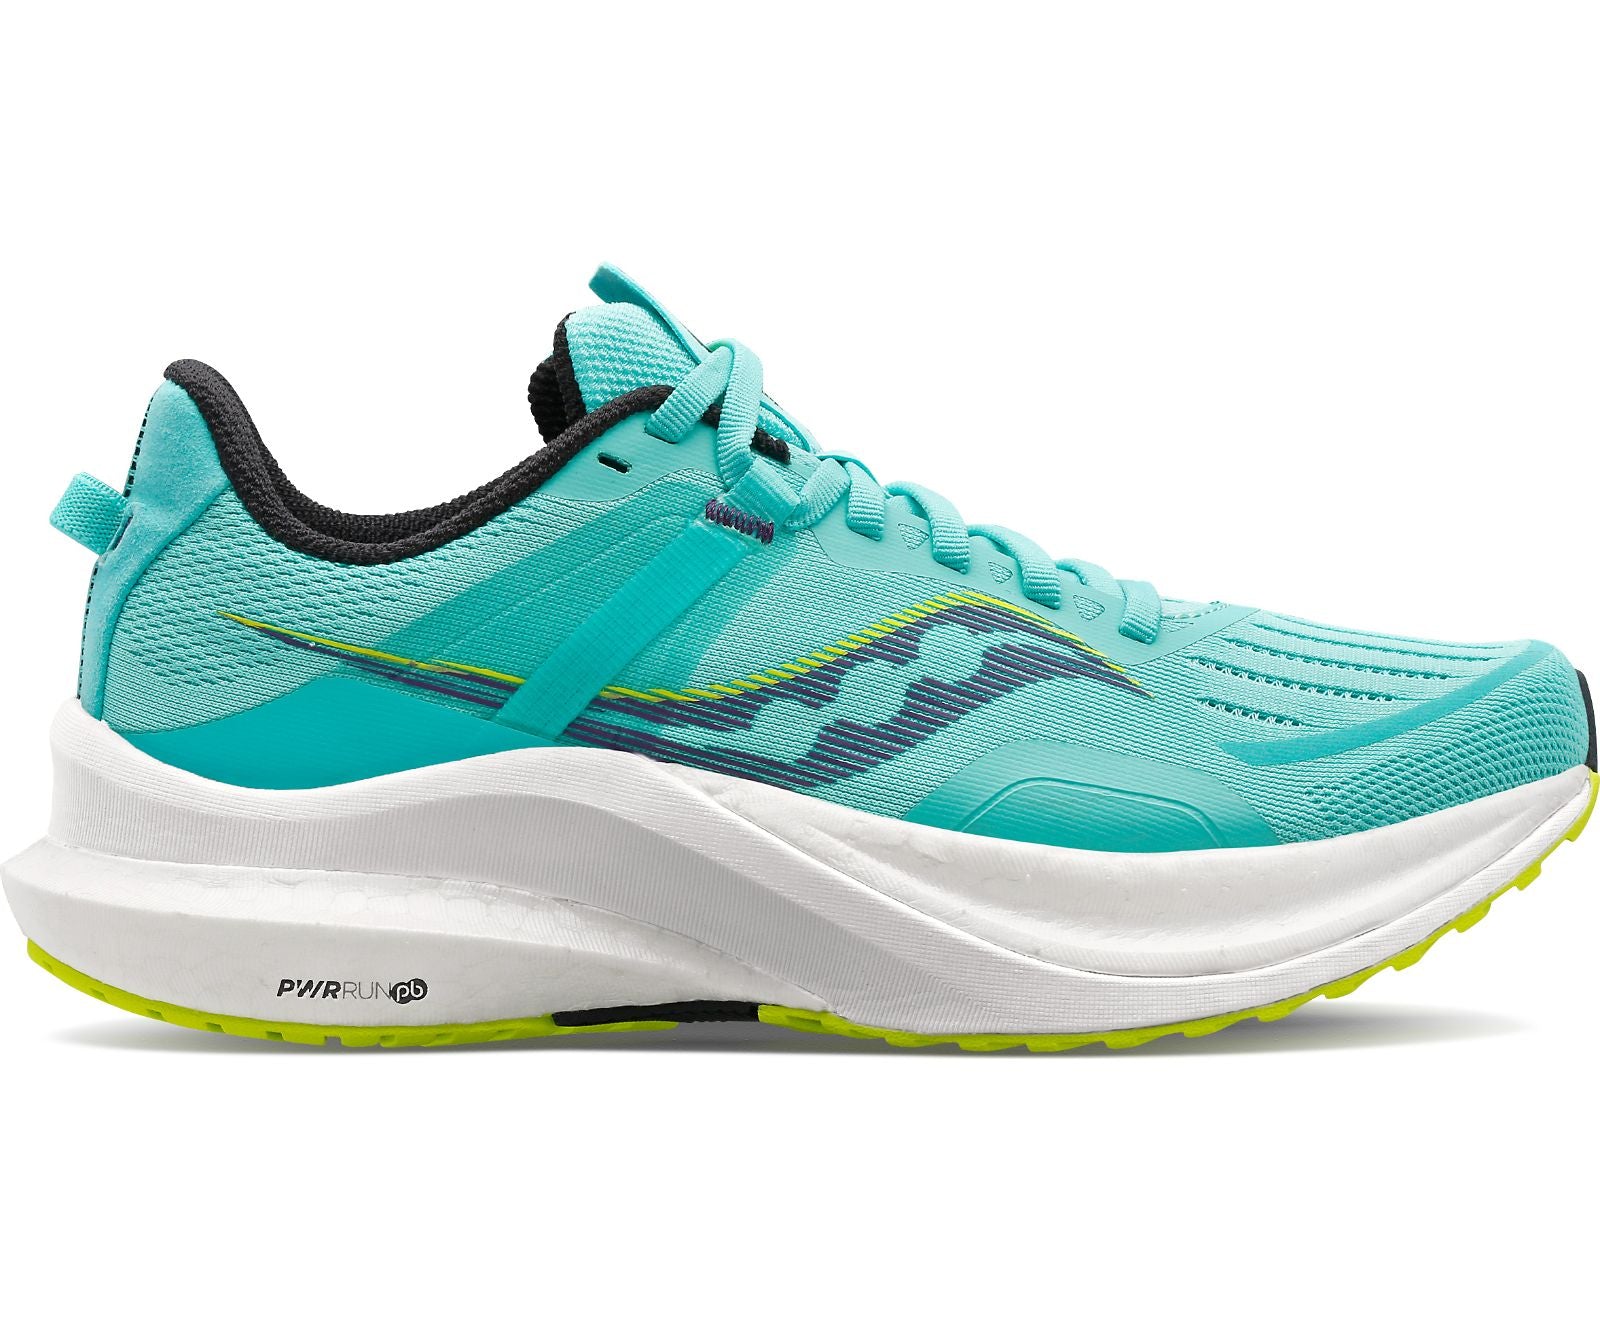 Lateral view of the Women's Tempus by Saucony in the color Cool Mint/Acid